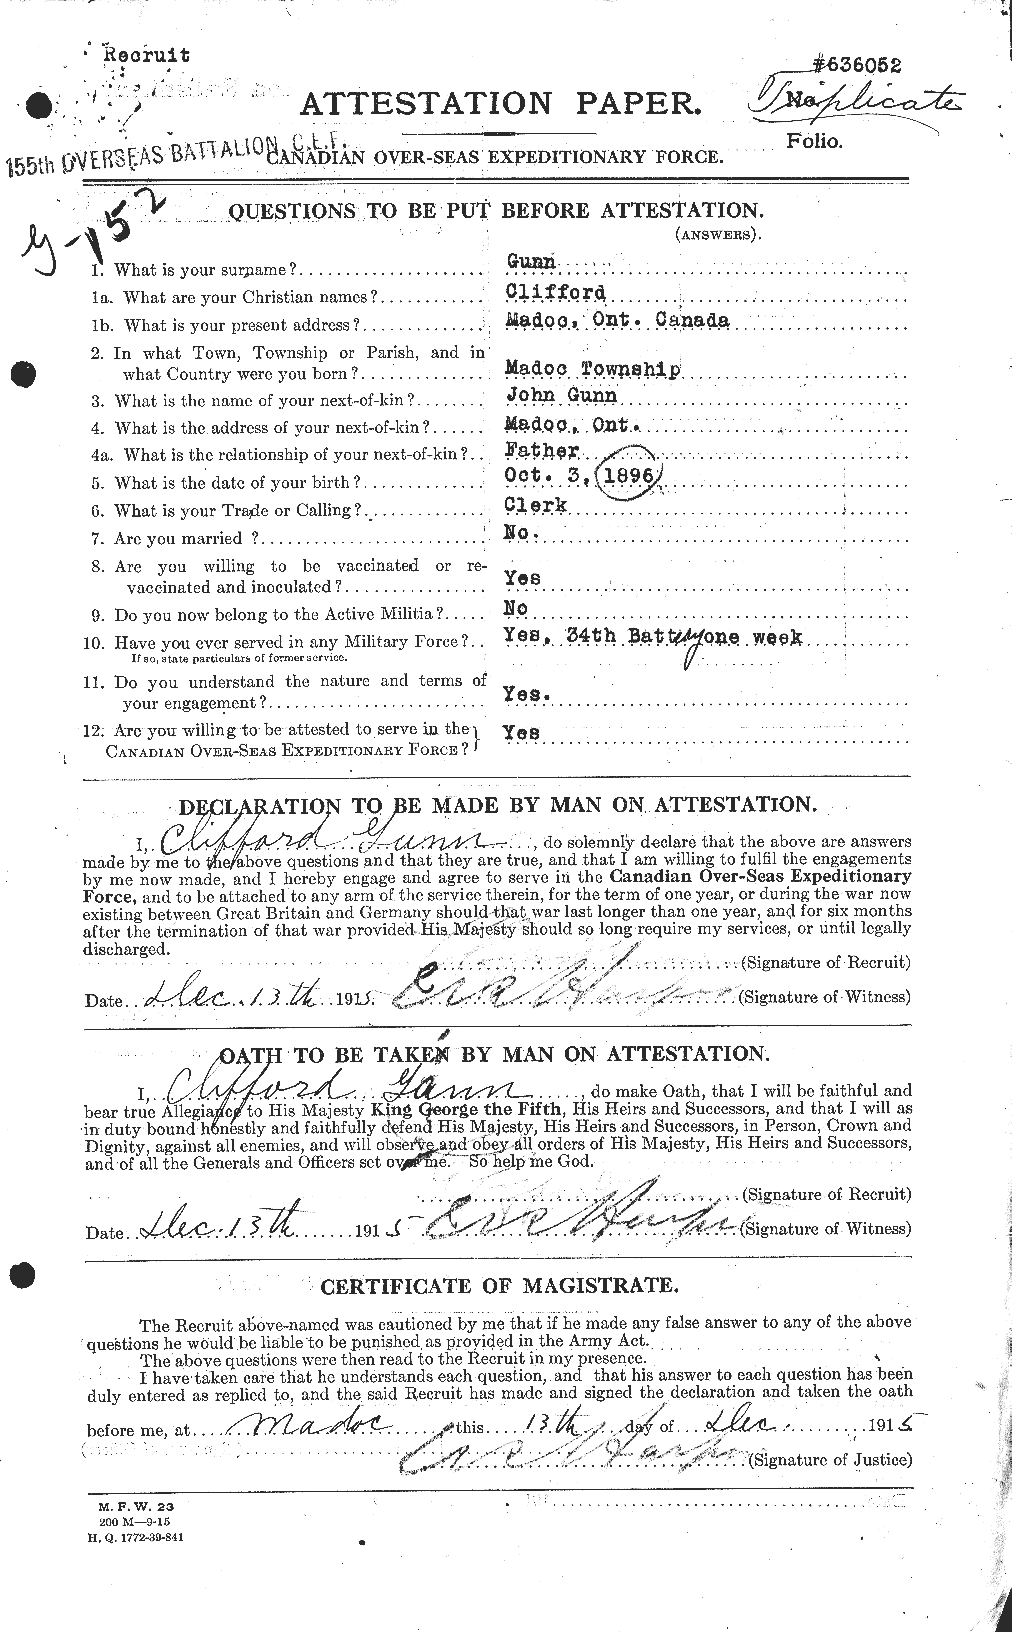 Personnel Records of the First World War - CEF 368012a